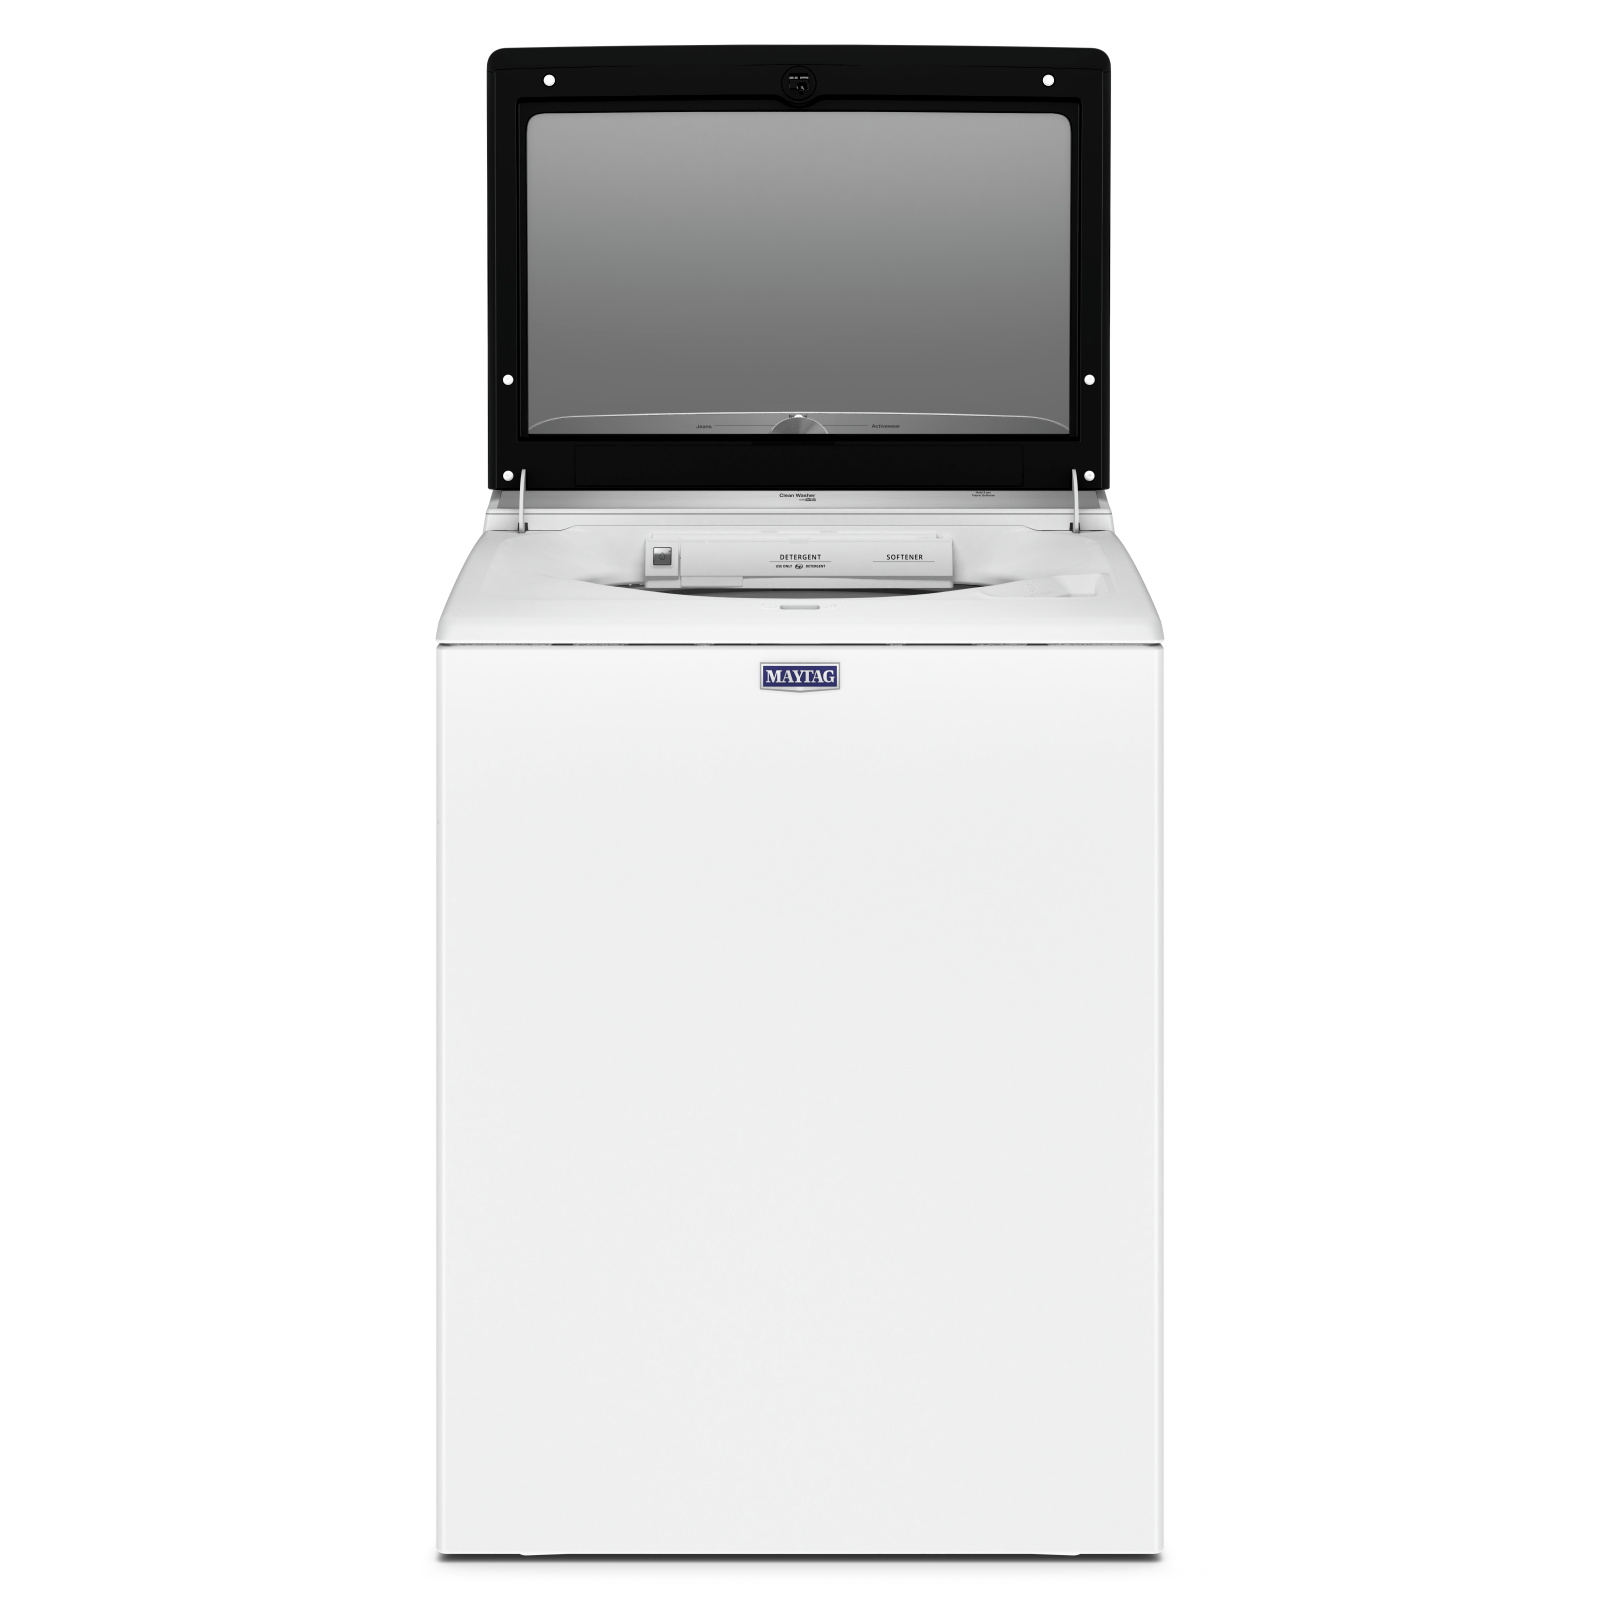 Maytag - 5.4 cu. Ft  Top Load Washer in White - MVW6500MW